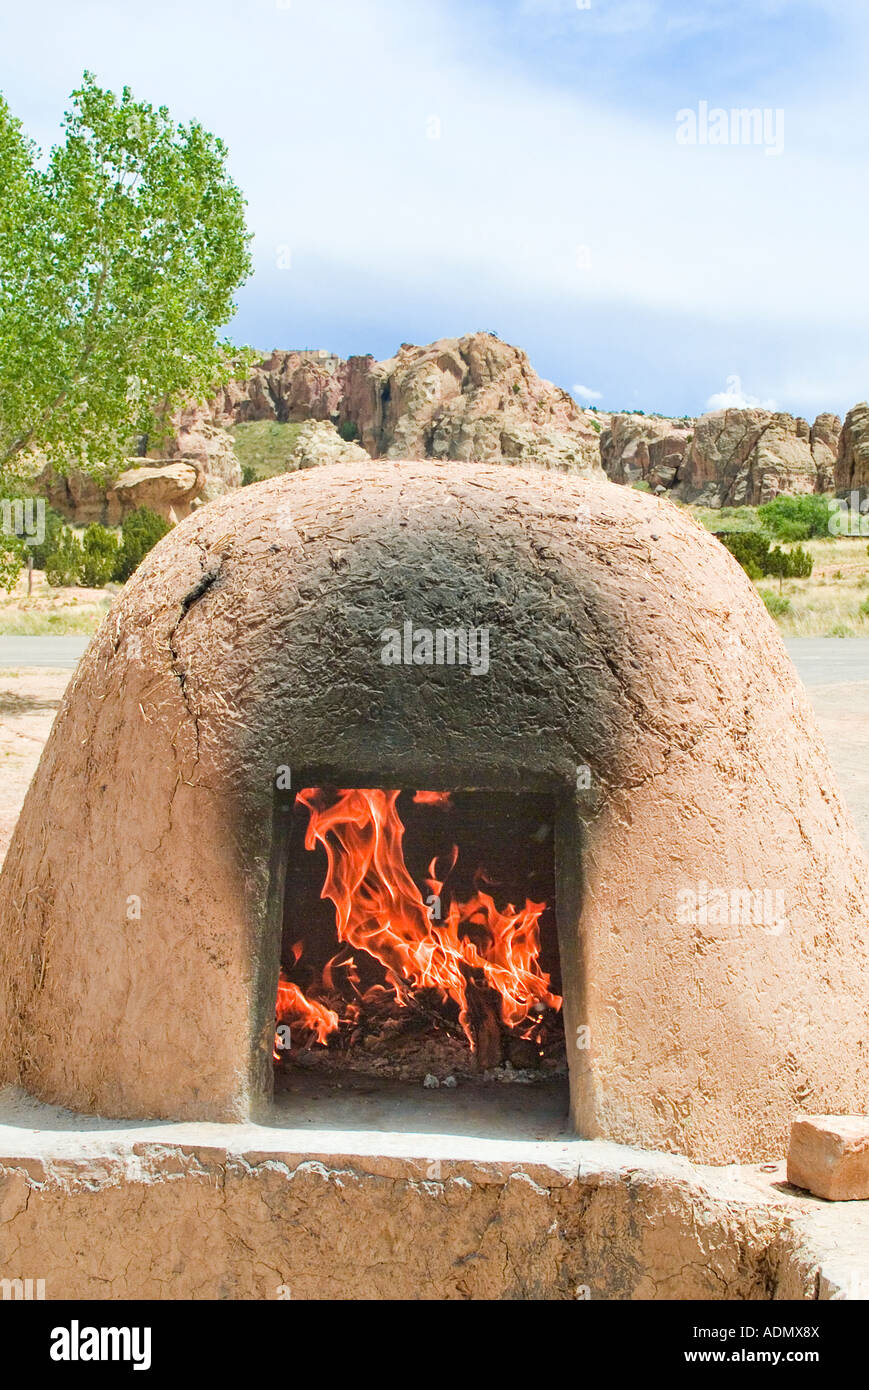 Pueblo style New Mexican Indian style bread oven traditional  outdoor fireplace Stock Photo